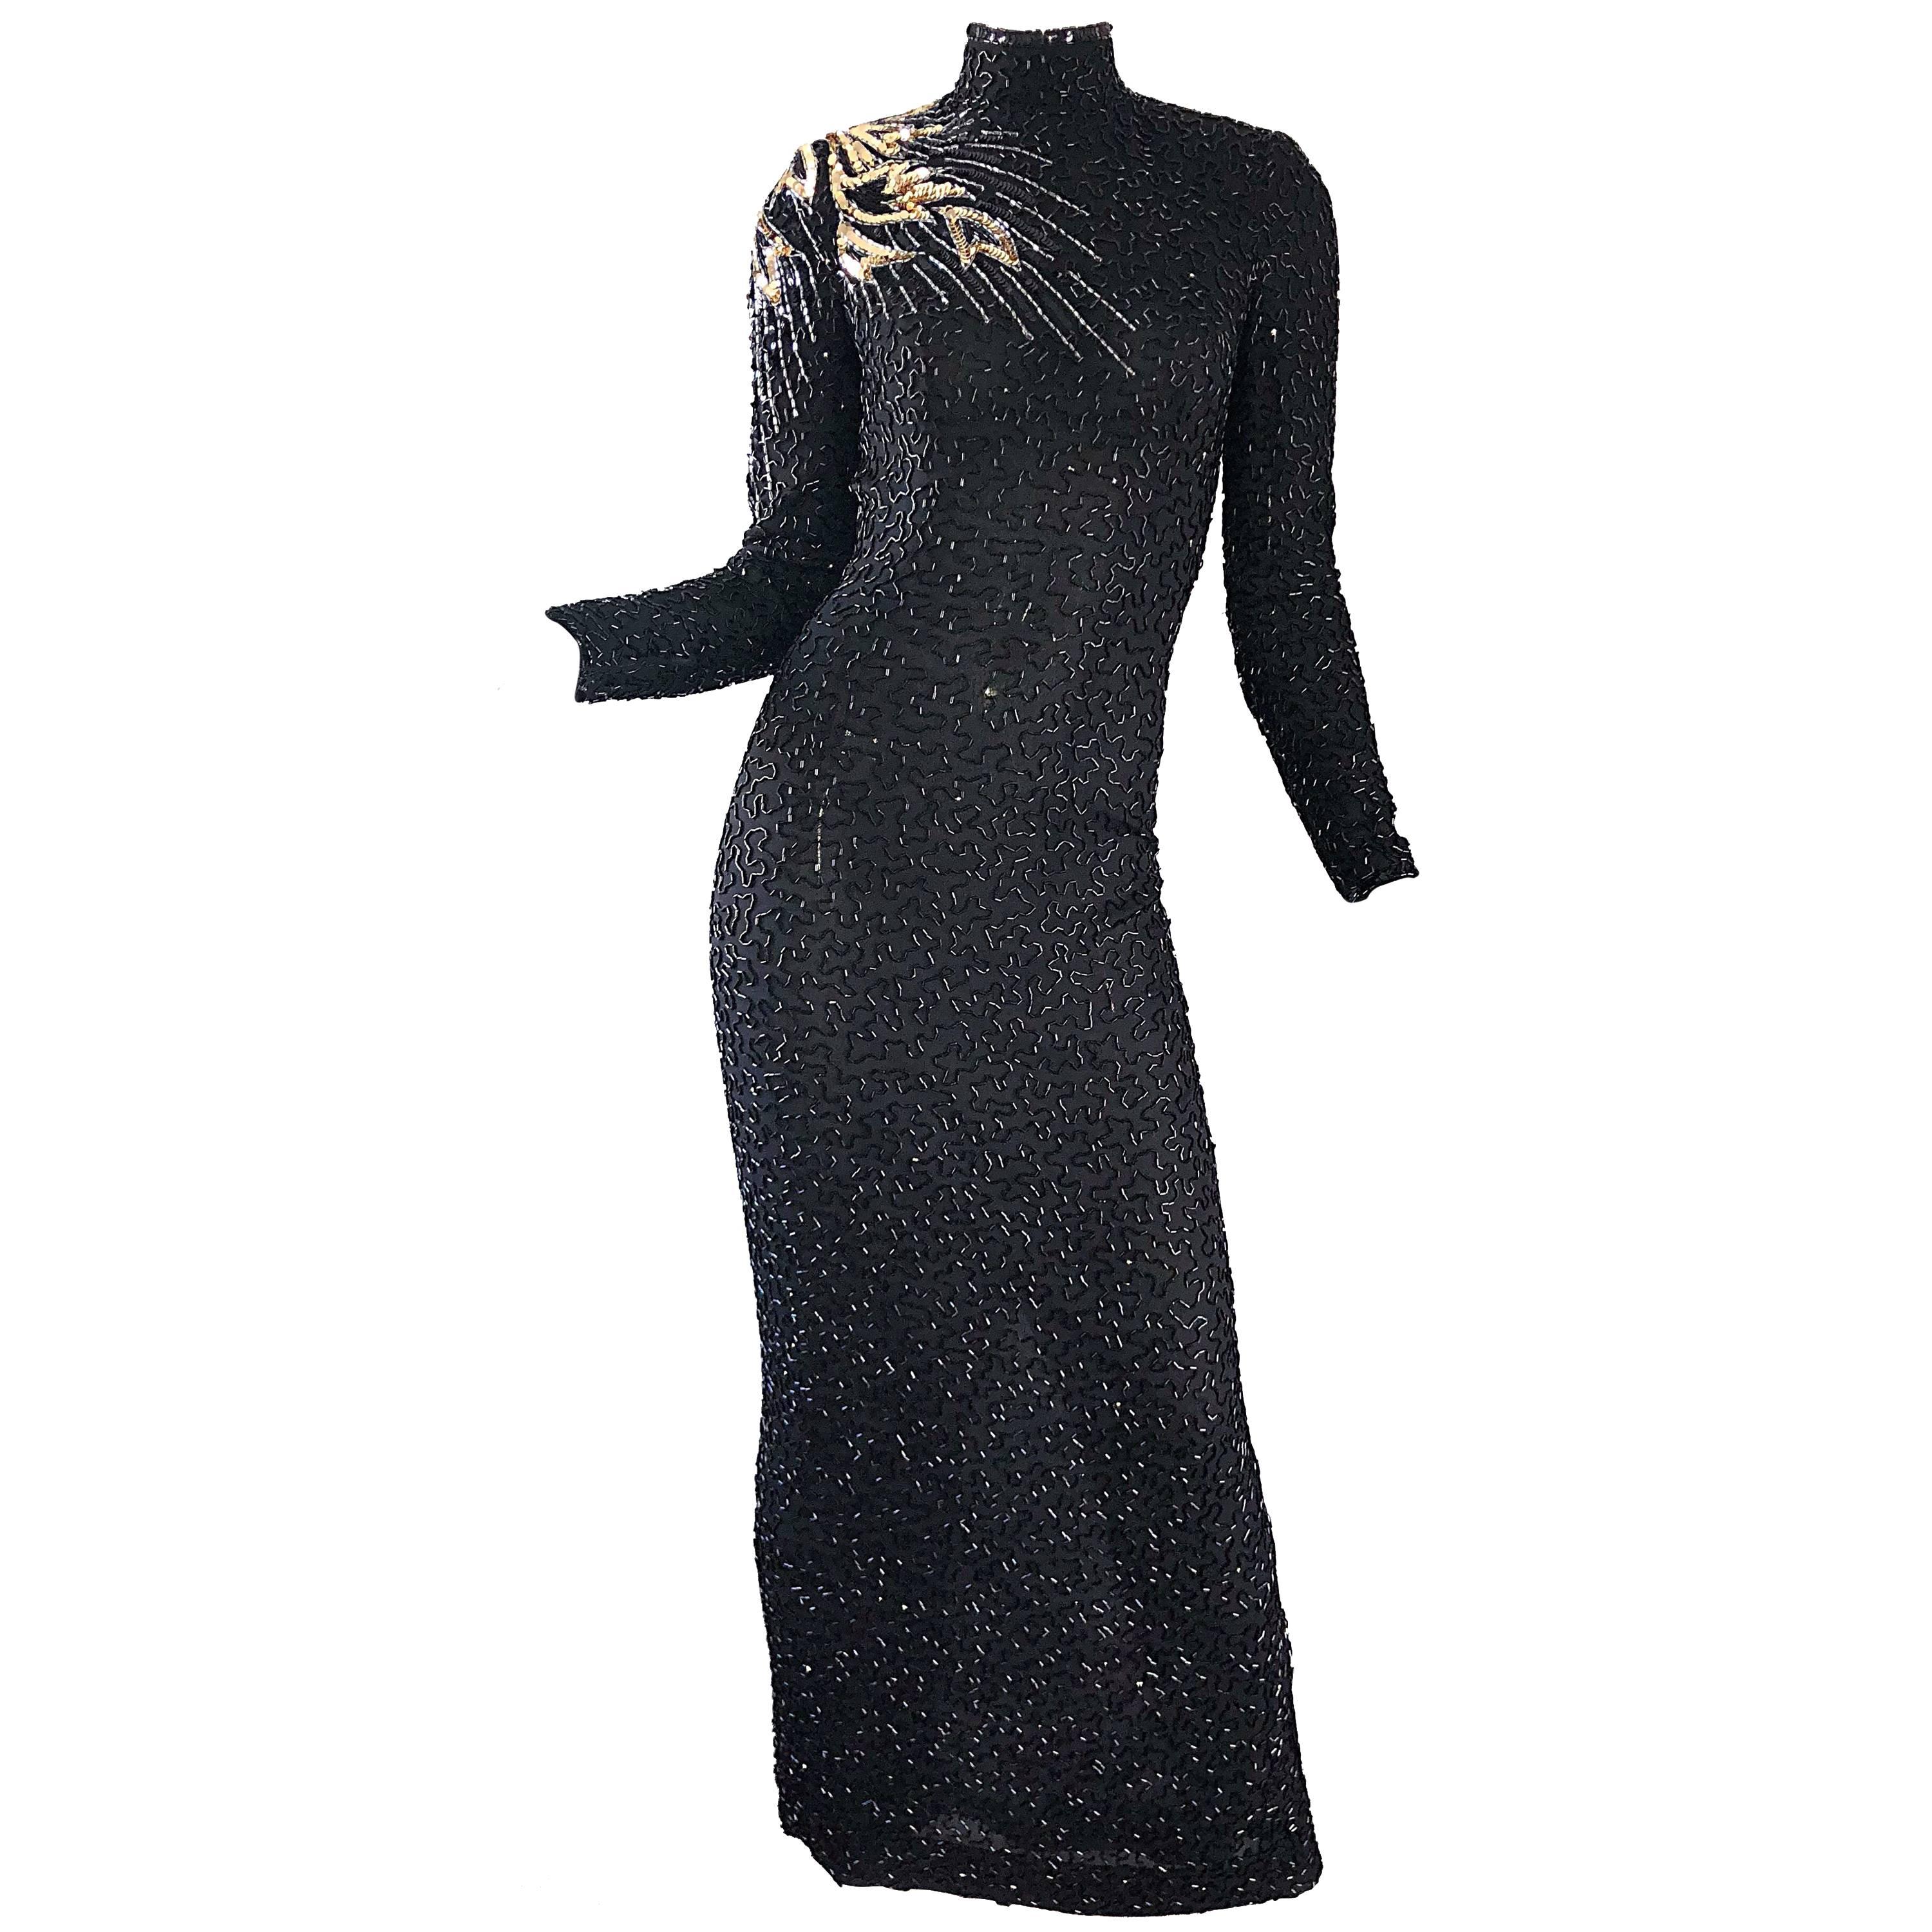 Stunning musuem quality 80s STEPHEN YEARICK Couture for Neiman Marcus silk chiffon fully beaded 'Shooting Star' shoulder open back evening gown! Wonderful flattering fit that fits like a glove! Thousands of hand-sewn black seed beads throughout the